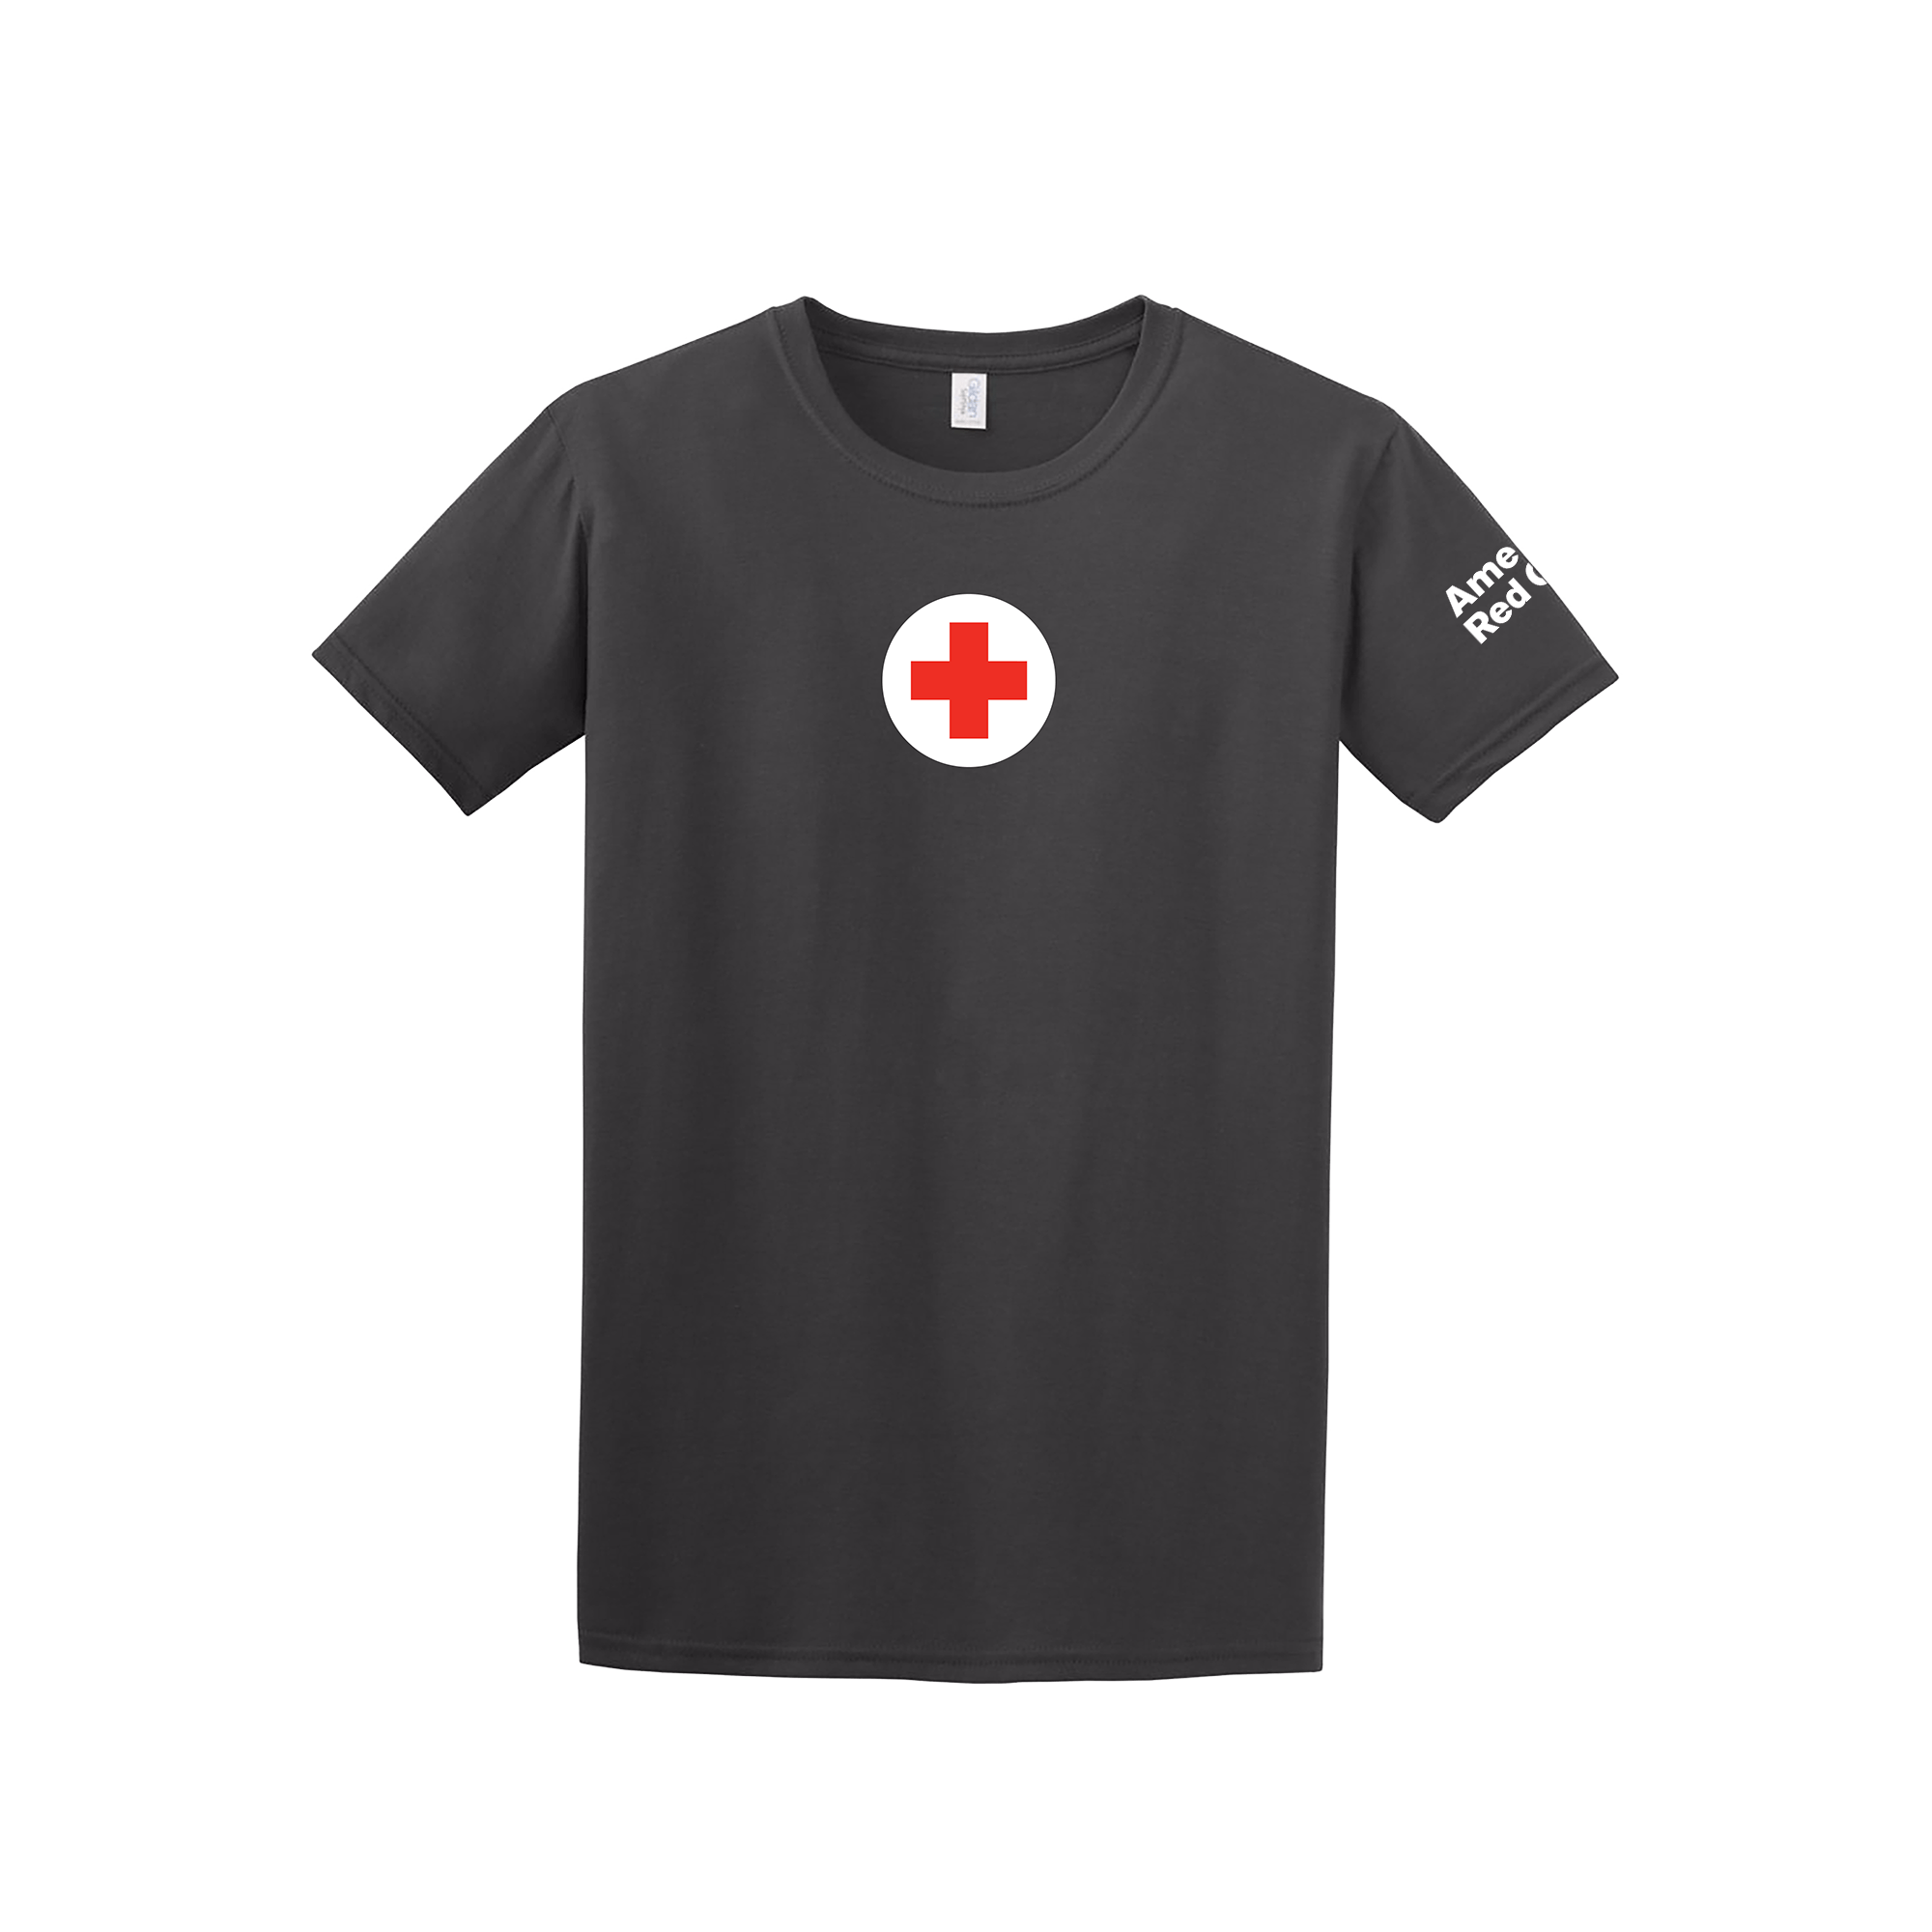 T and Red Cross Logo - Unisex 100% Cotton T-Shirt with ARC Logo | Red Cross Store